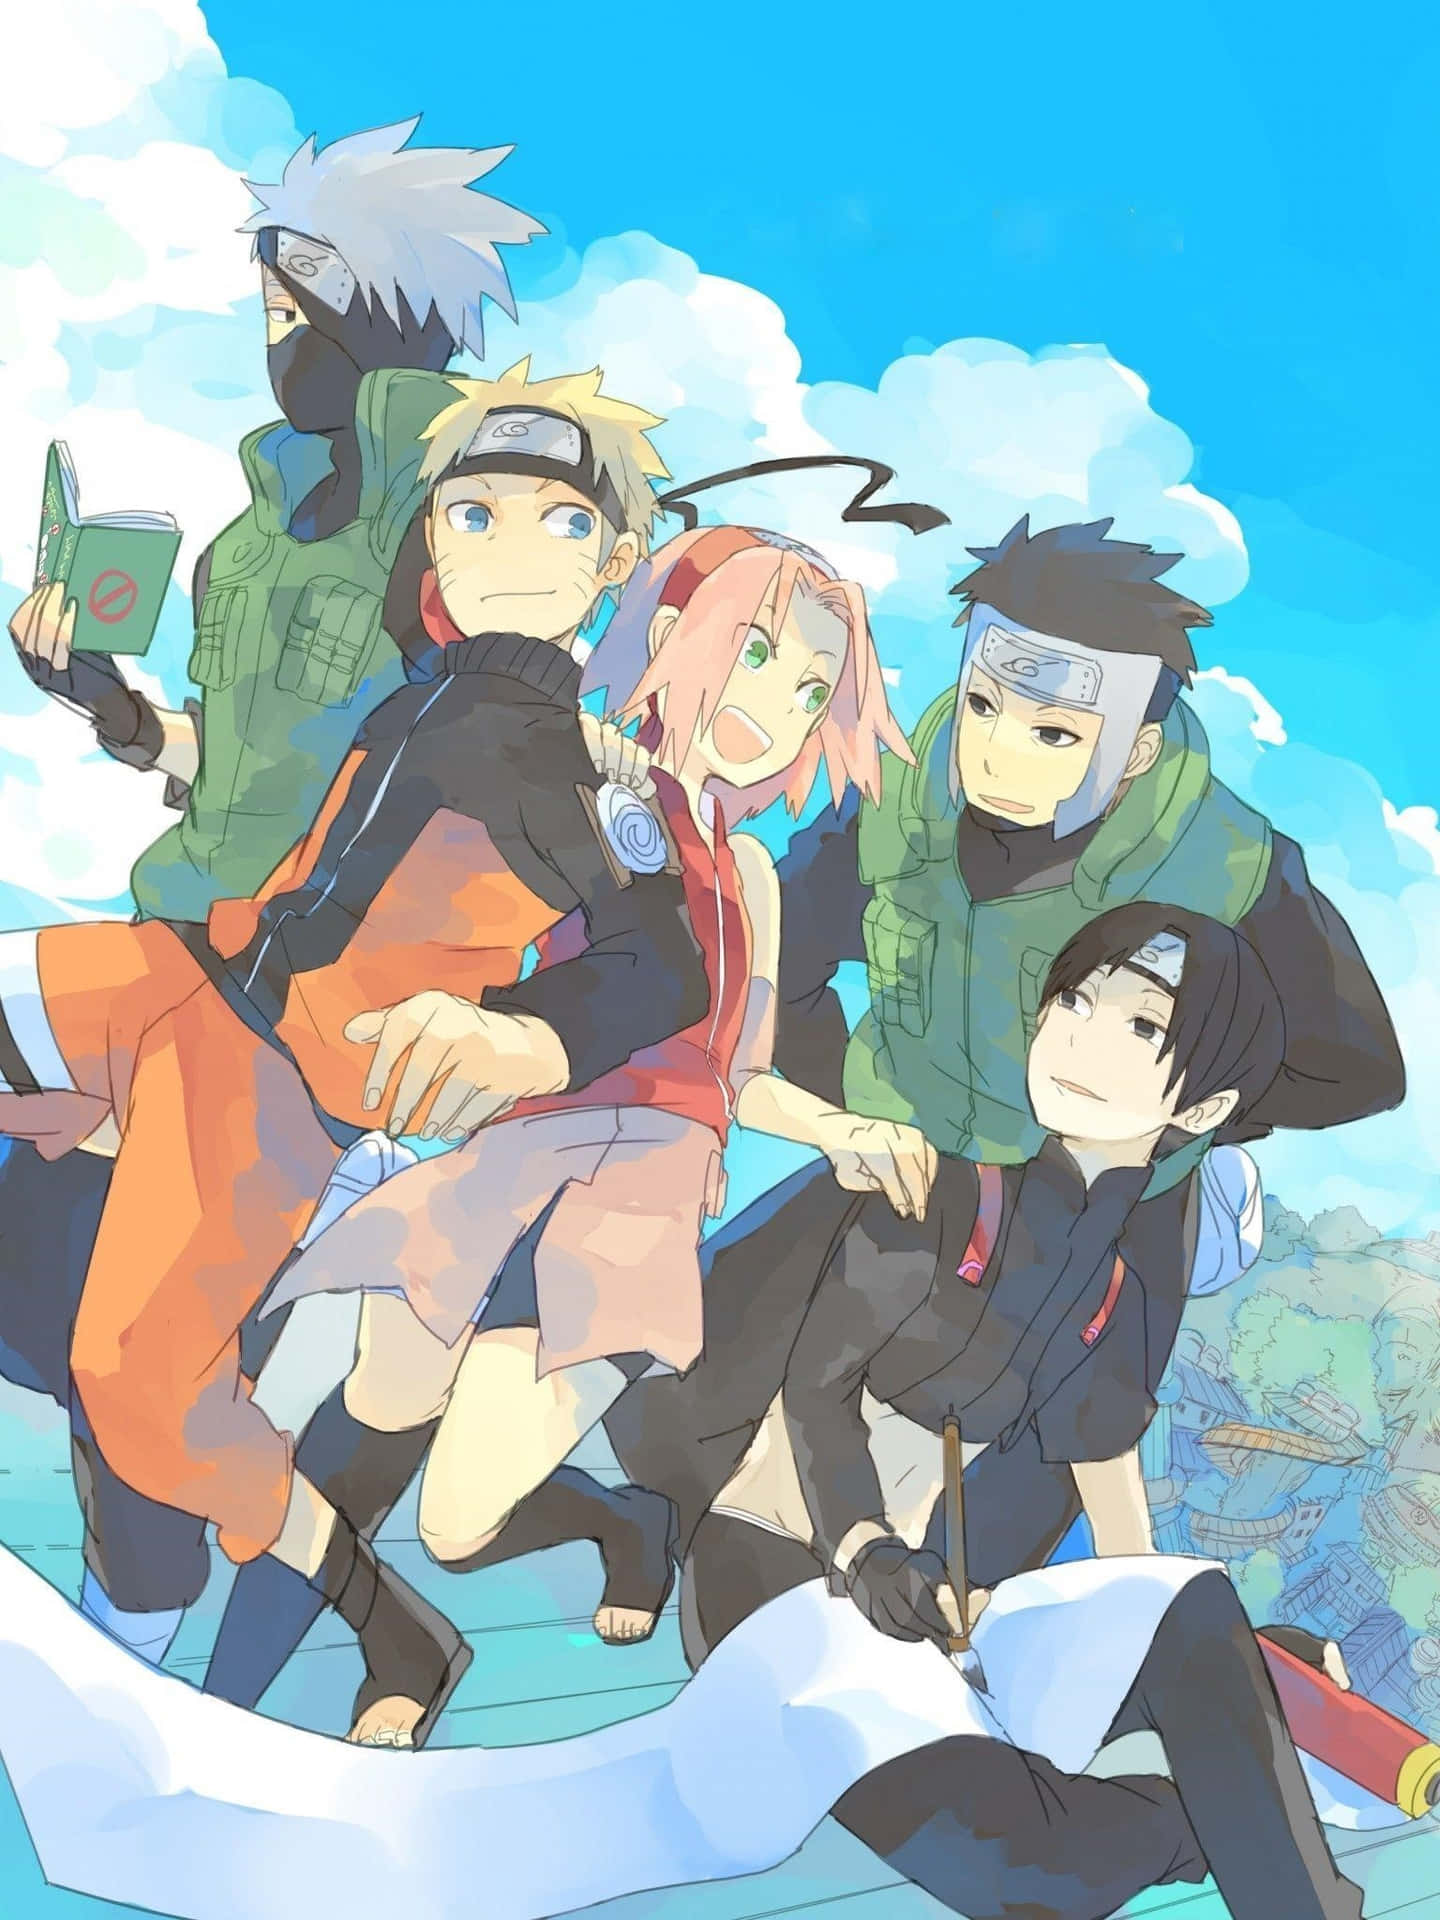 Naruto and Friends in Battle Stance Wallpaper